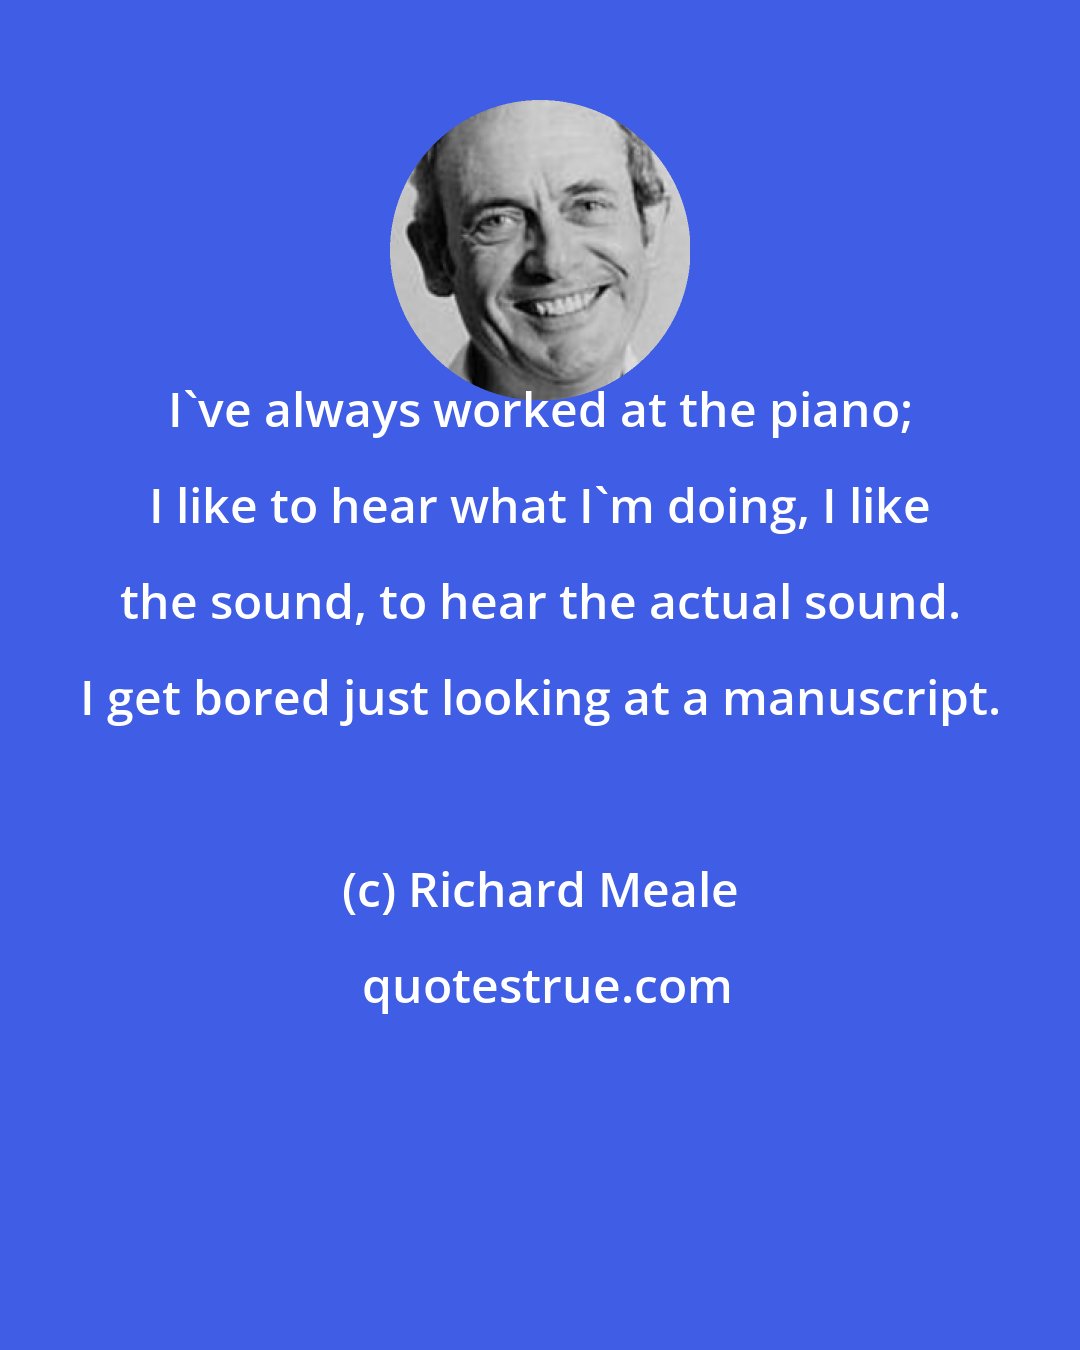 Richard Meale: I've always worked at the piano; I like to hear what I'm doing, I like the sound, to hear the actual sound. I get bored just looking at a manuscript.